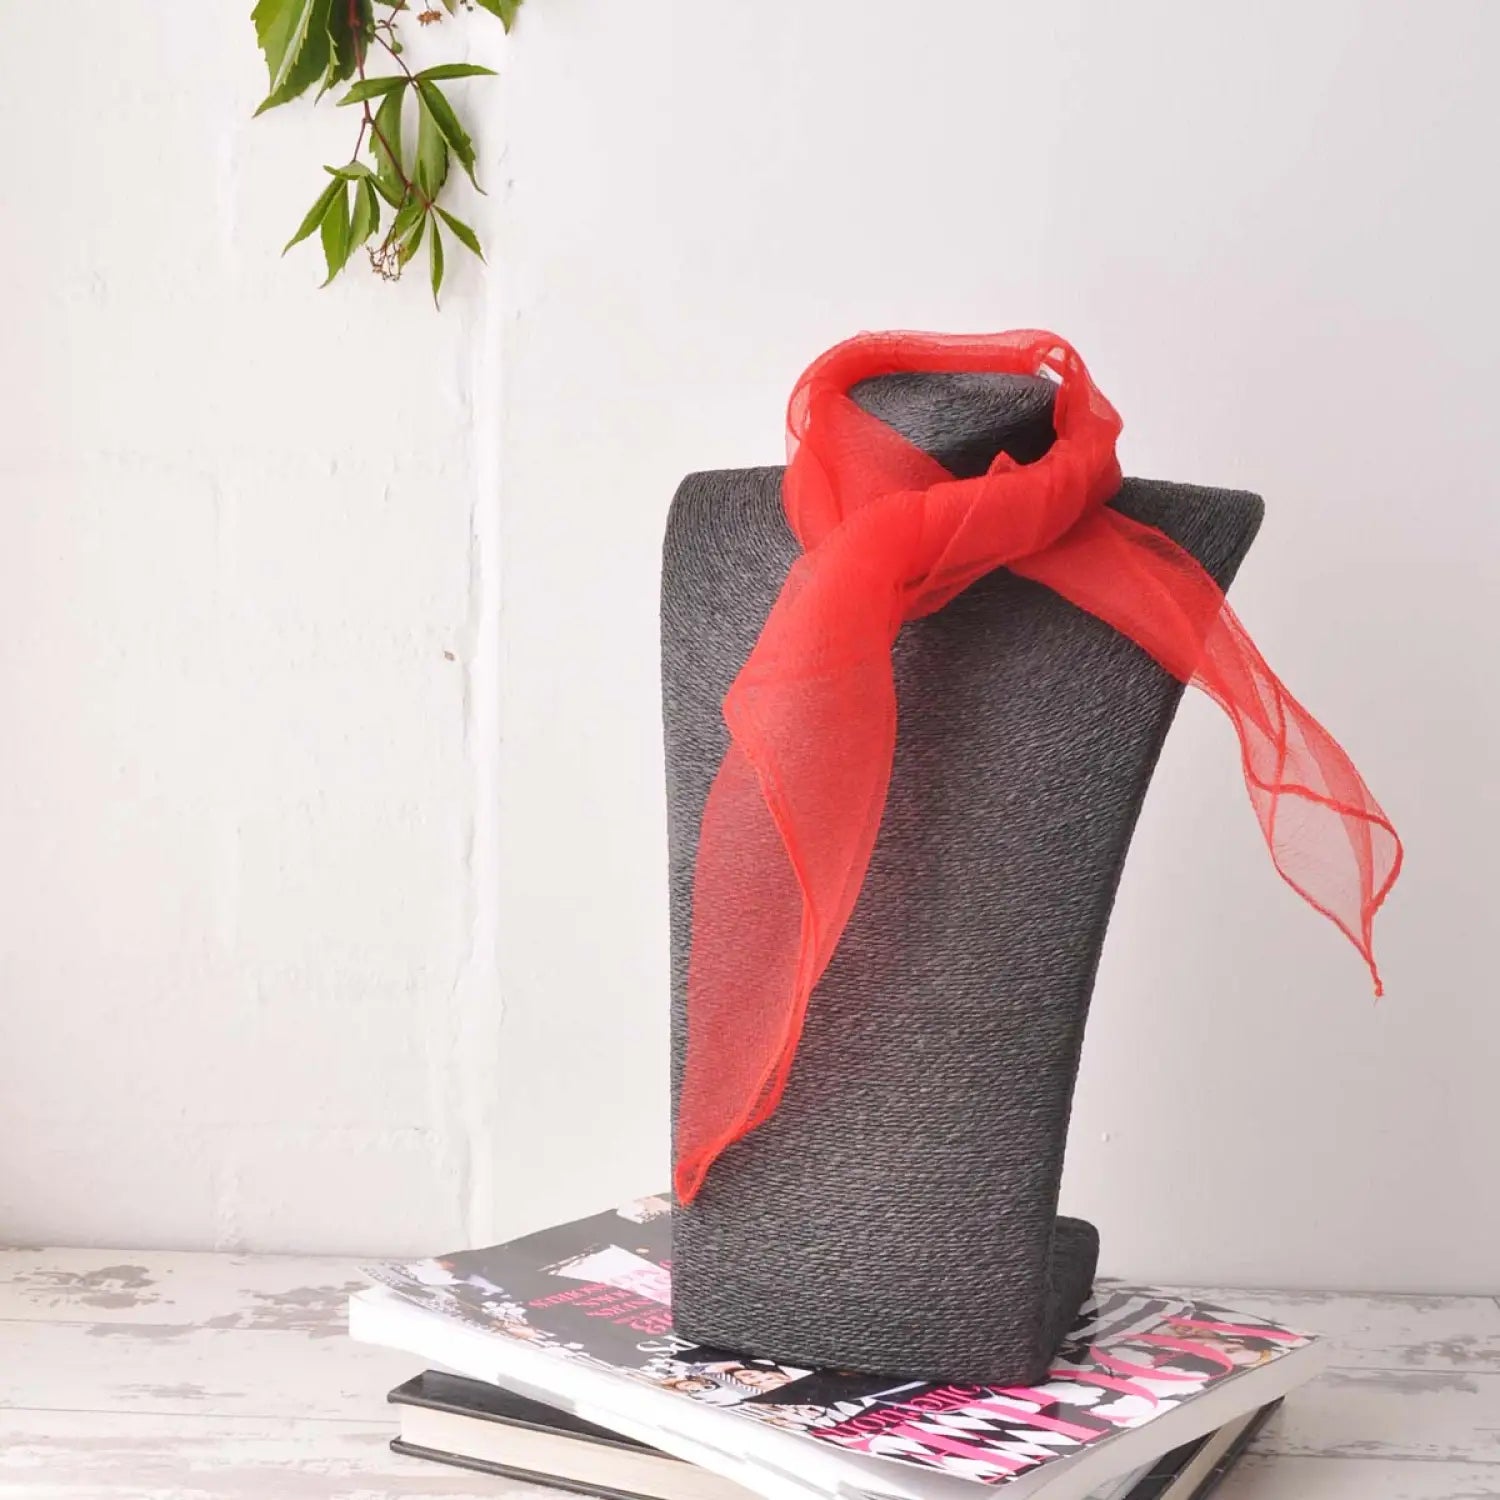 Chiffon square scarf with red ribbon on top for retro organza style